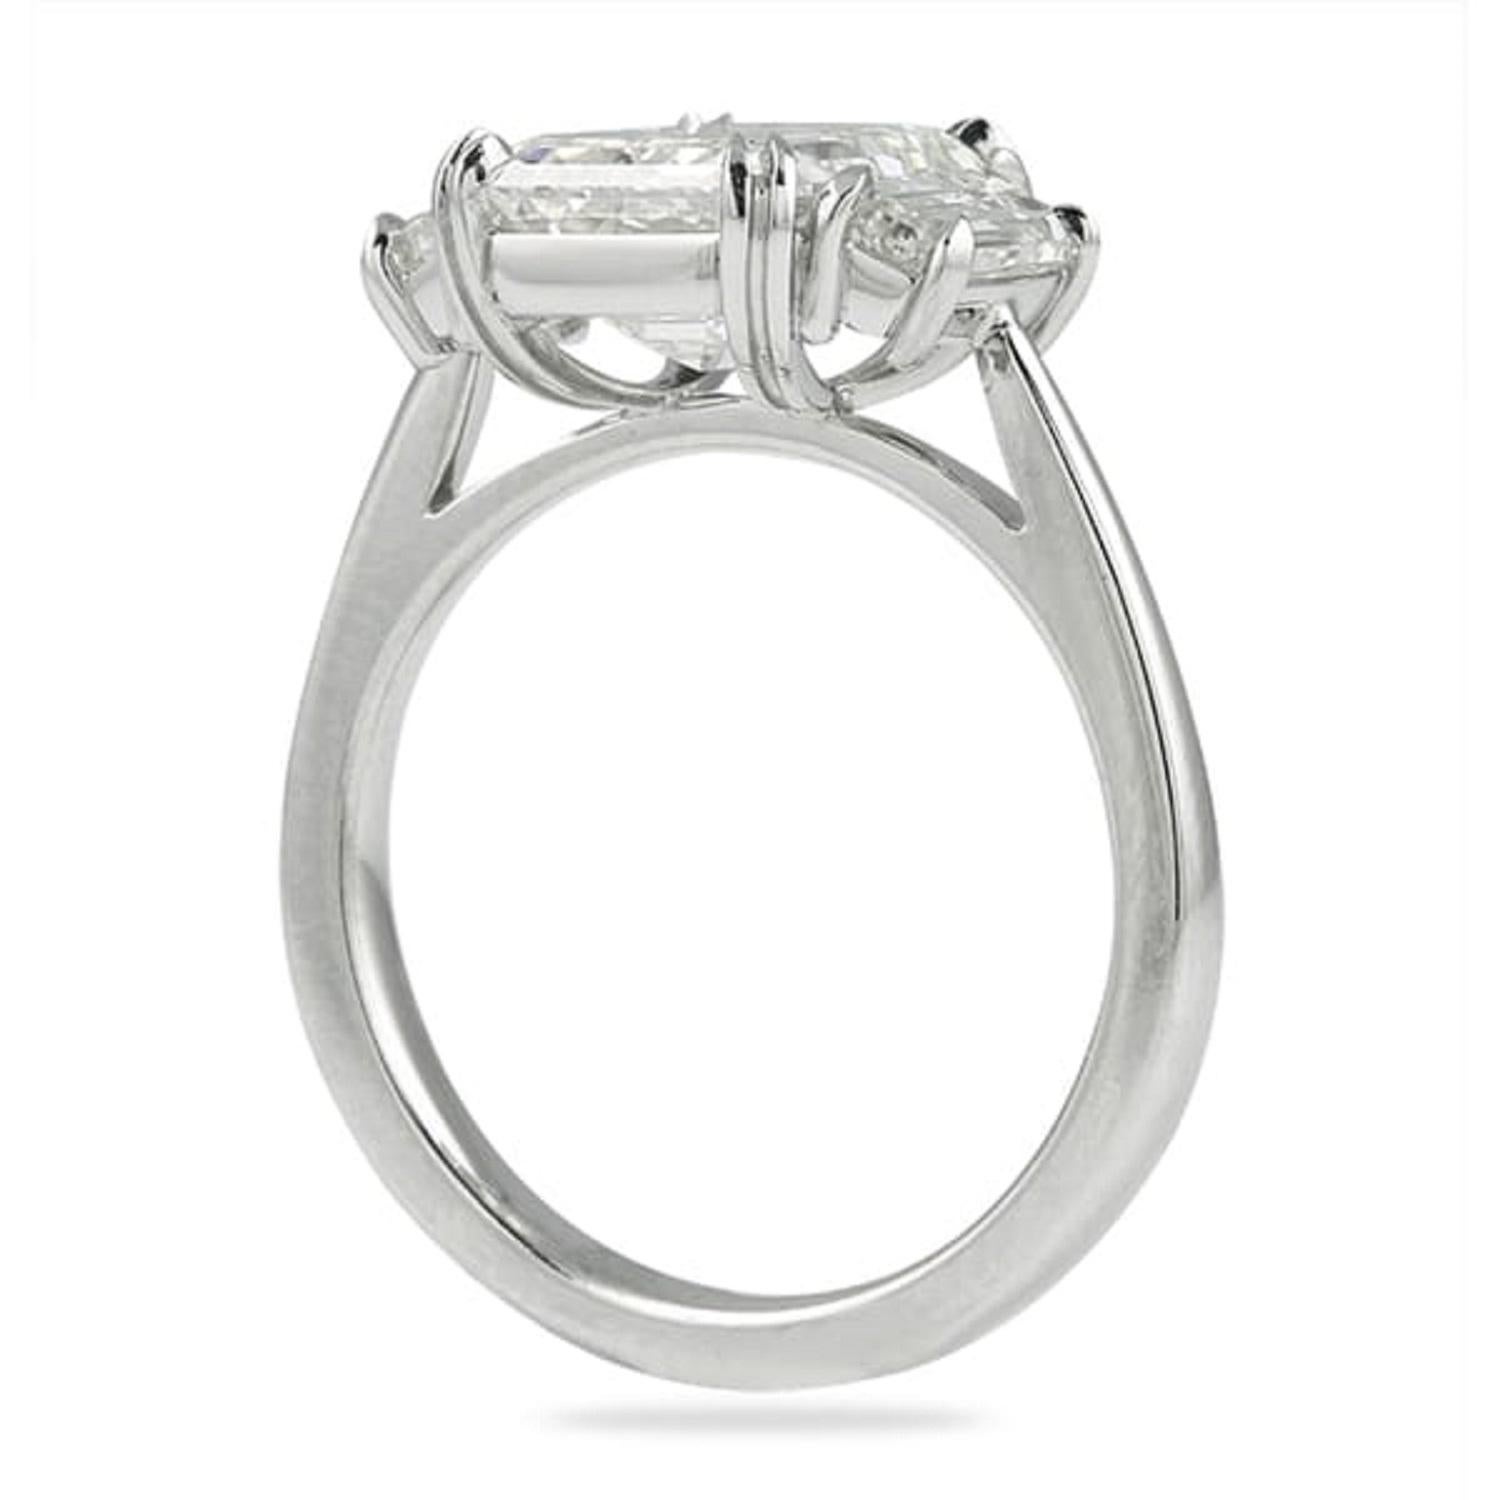 This lovely and significant ring centers on a 3.72 carat emerald-cut diamond with D rare white color and  Flawless clarity. The Internally Flawless stone is flanked by two trapezoid-cut diamonds totaling mounted in platinum. 

Internally Flawless